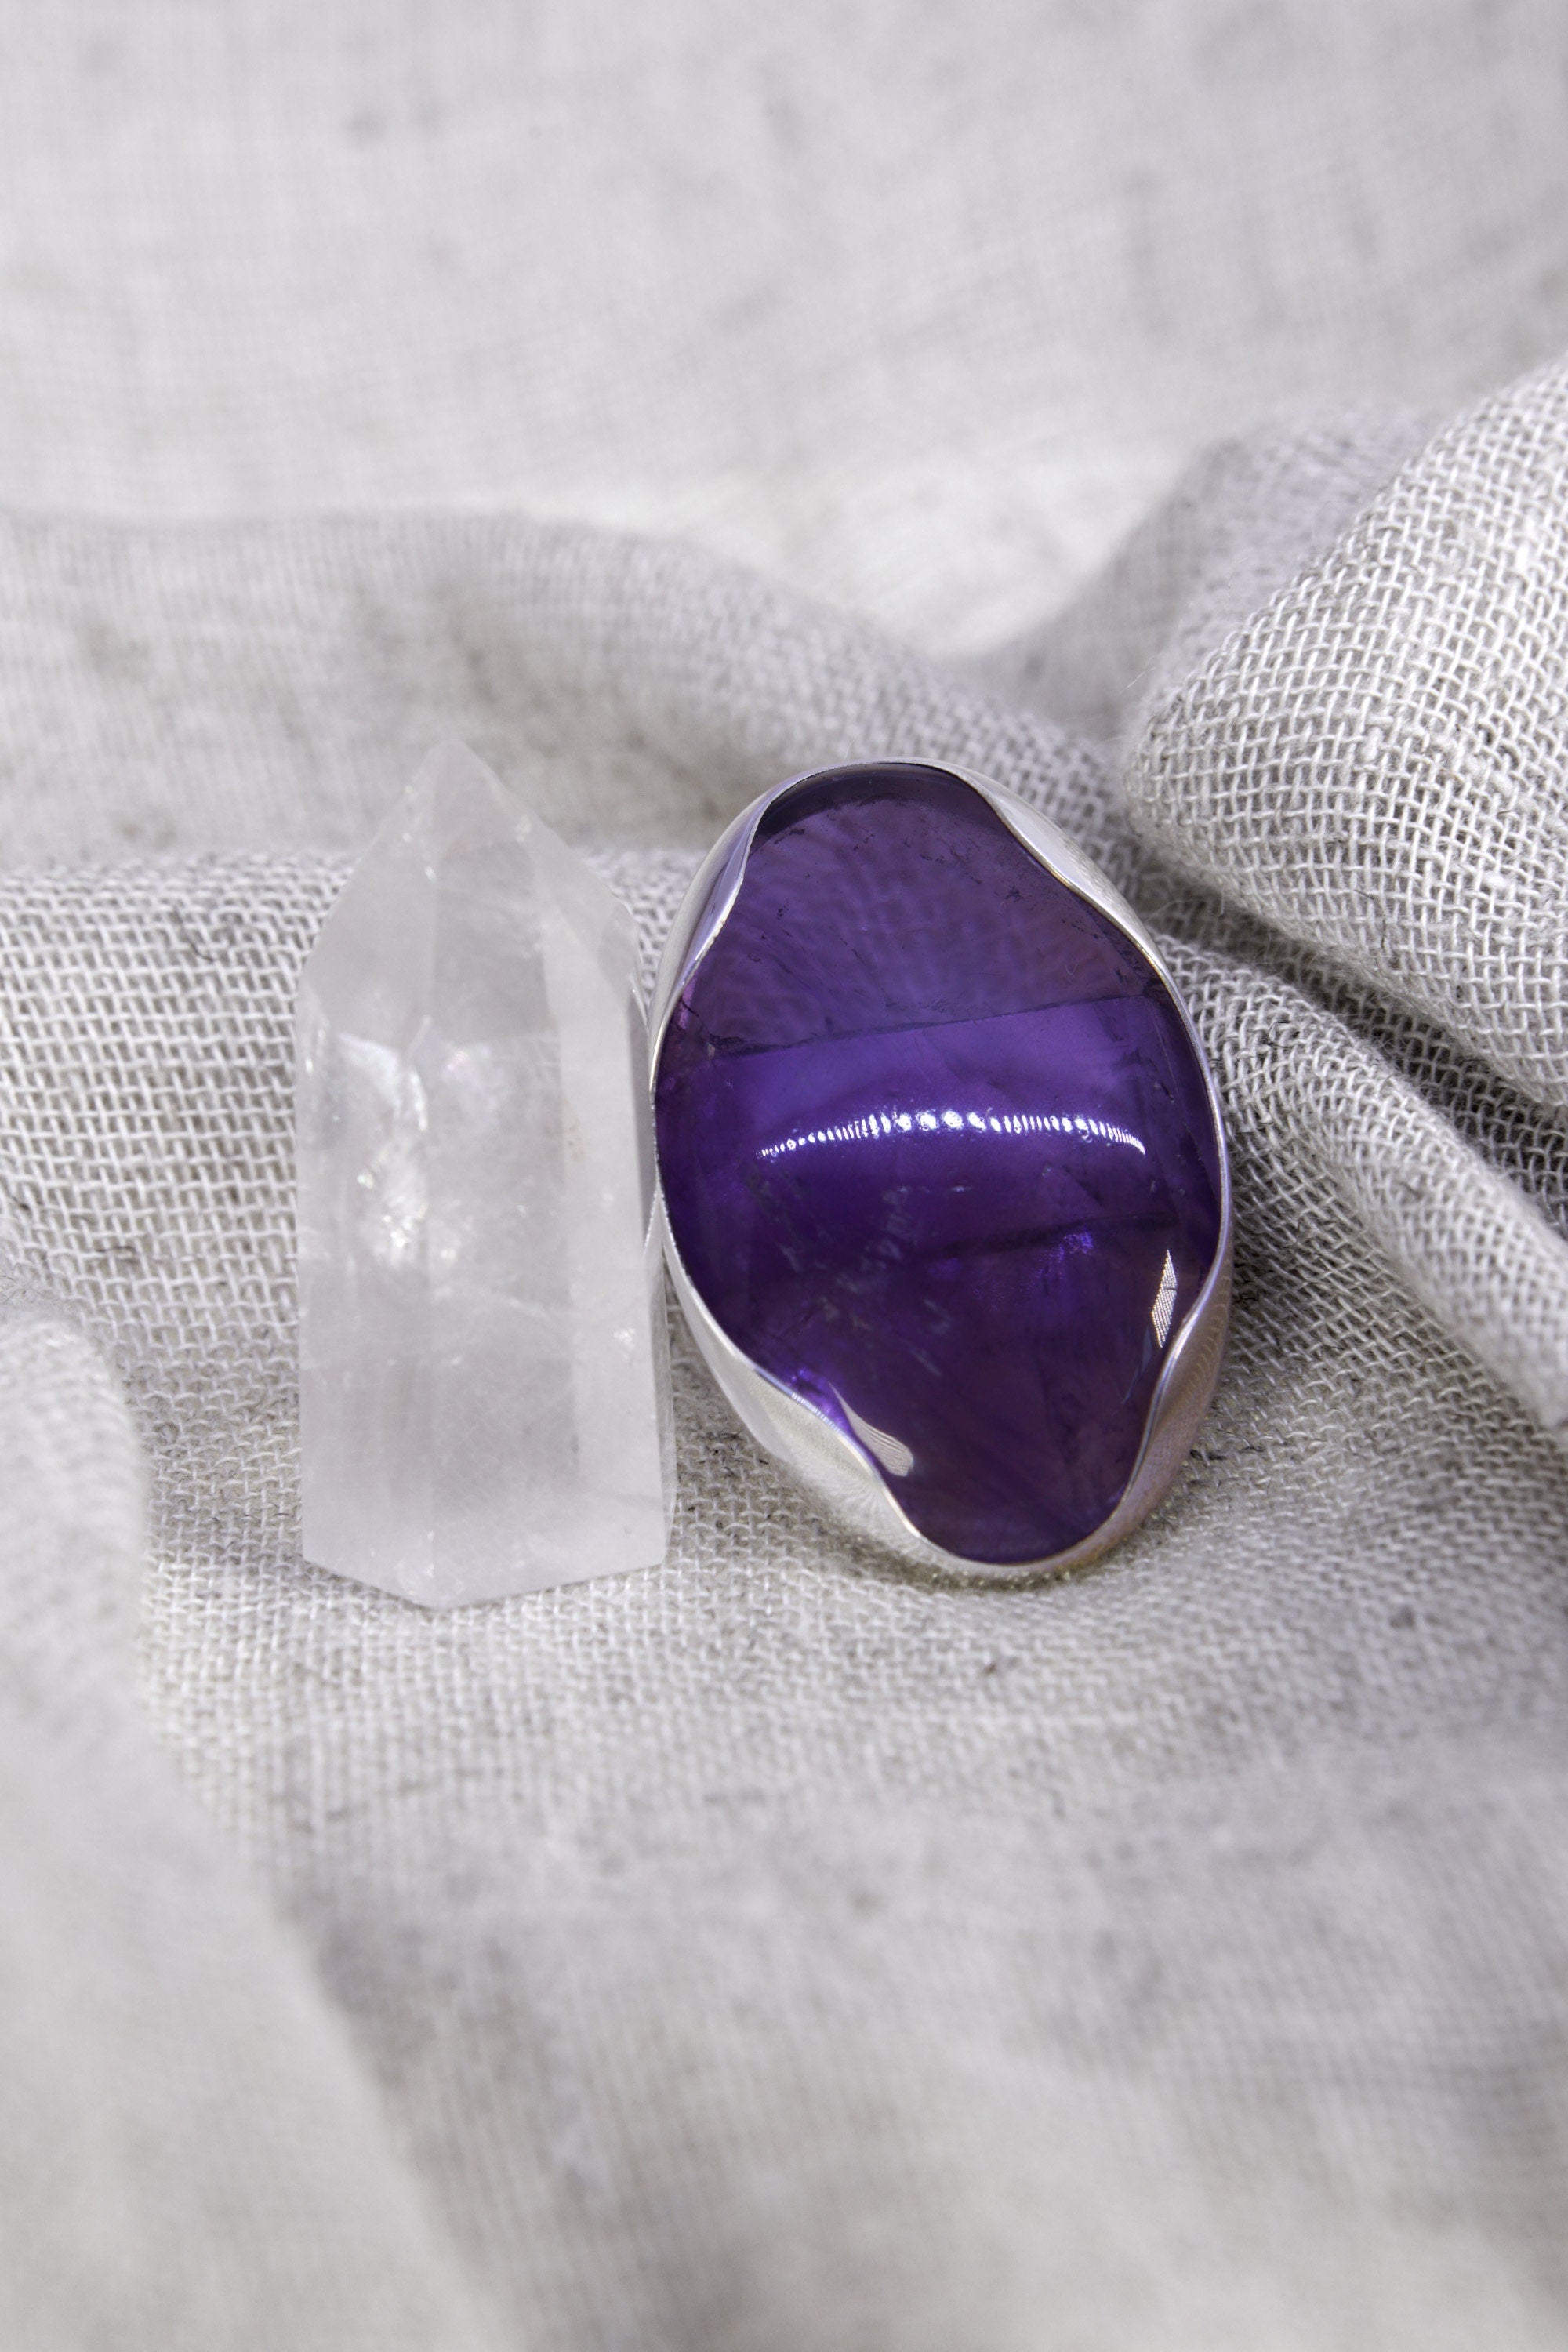 A Sturdy Veil of Elegance and Mystique: Adjustable Sterling Silver Ring with Amethyst Oval - Unisex - Size 5-12 US - NO/02